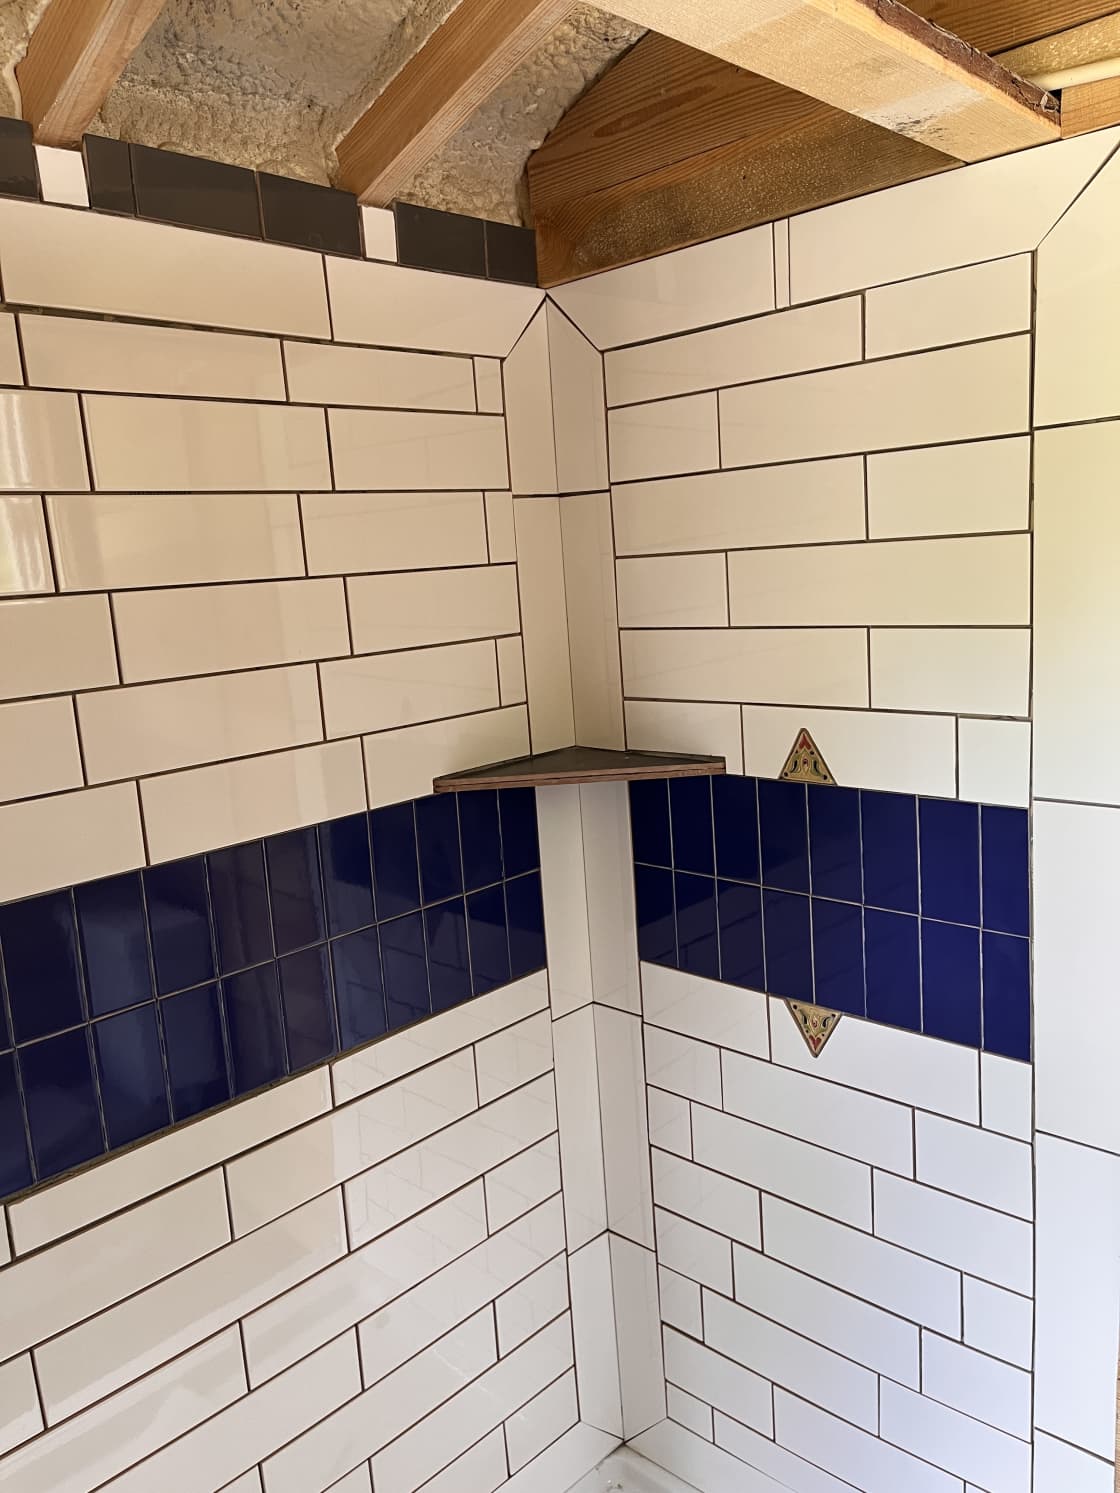 Just tiled the shower.